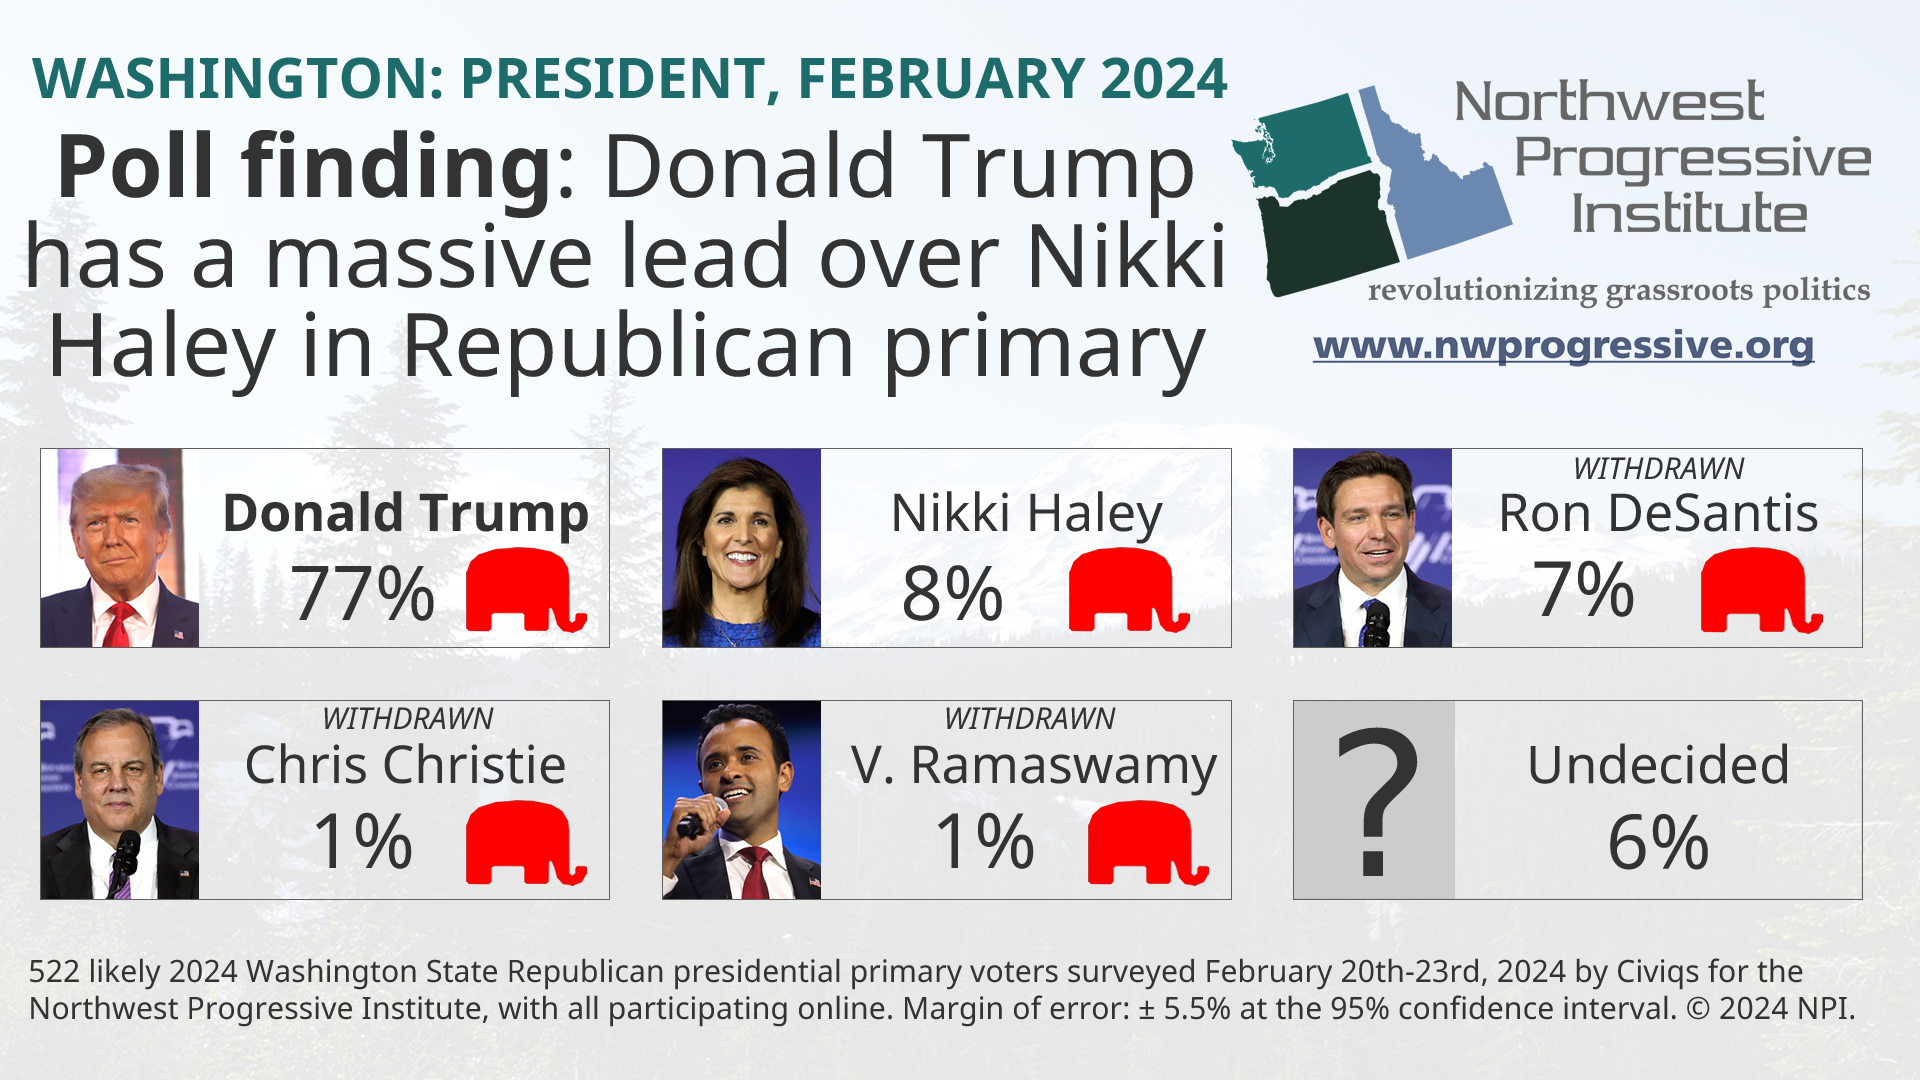 Visualization of NPI's February 2024 Republican presidential primary poll finding